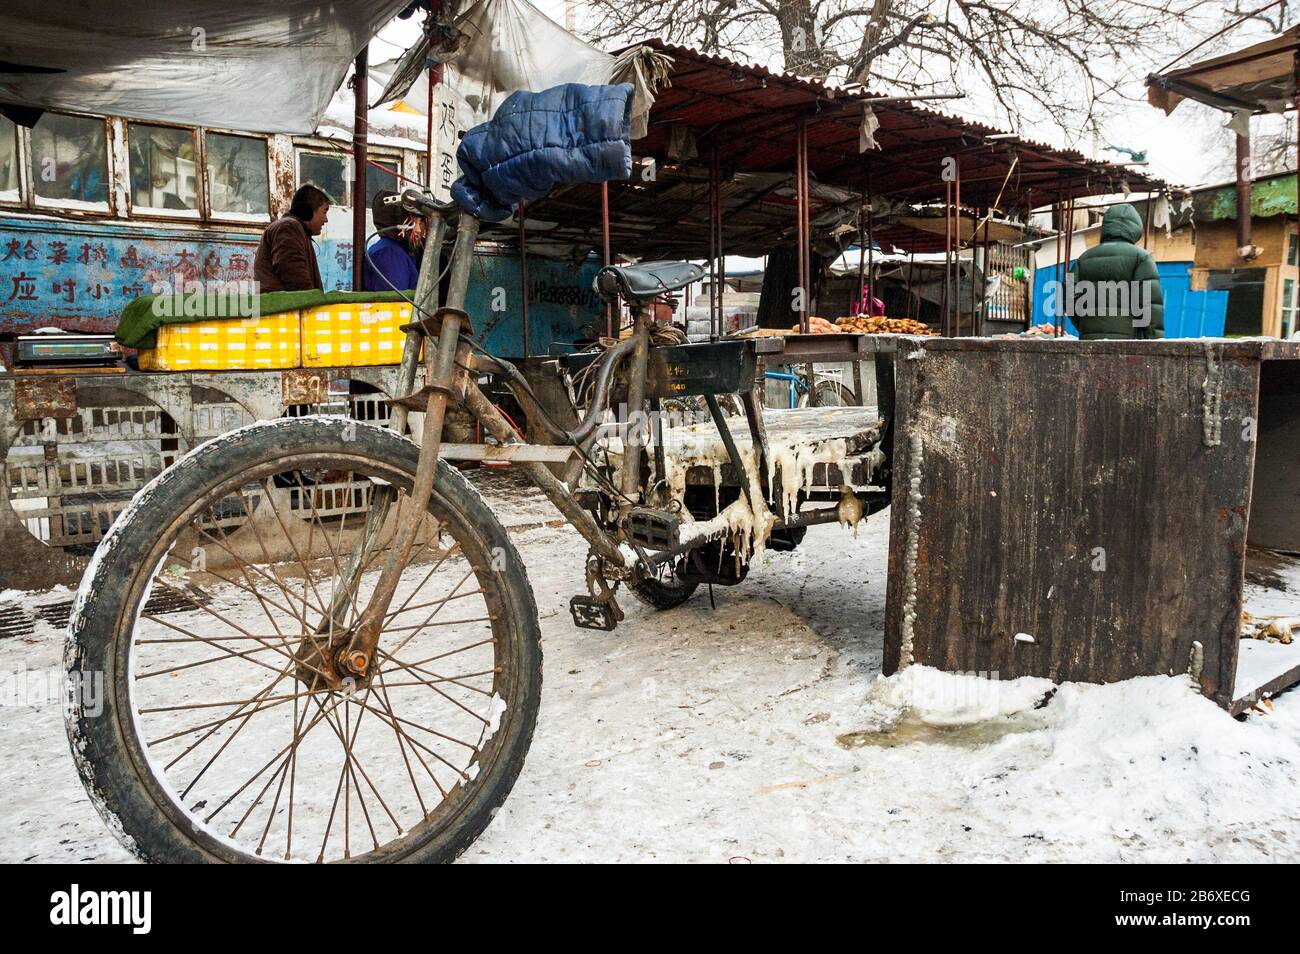 A frozen tricycle in a market in the more rural part of Harbin near the former Japanese Germ Warfare Experimental Base. Stock Photo